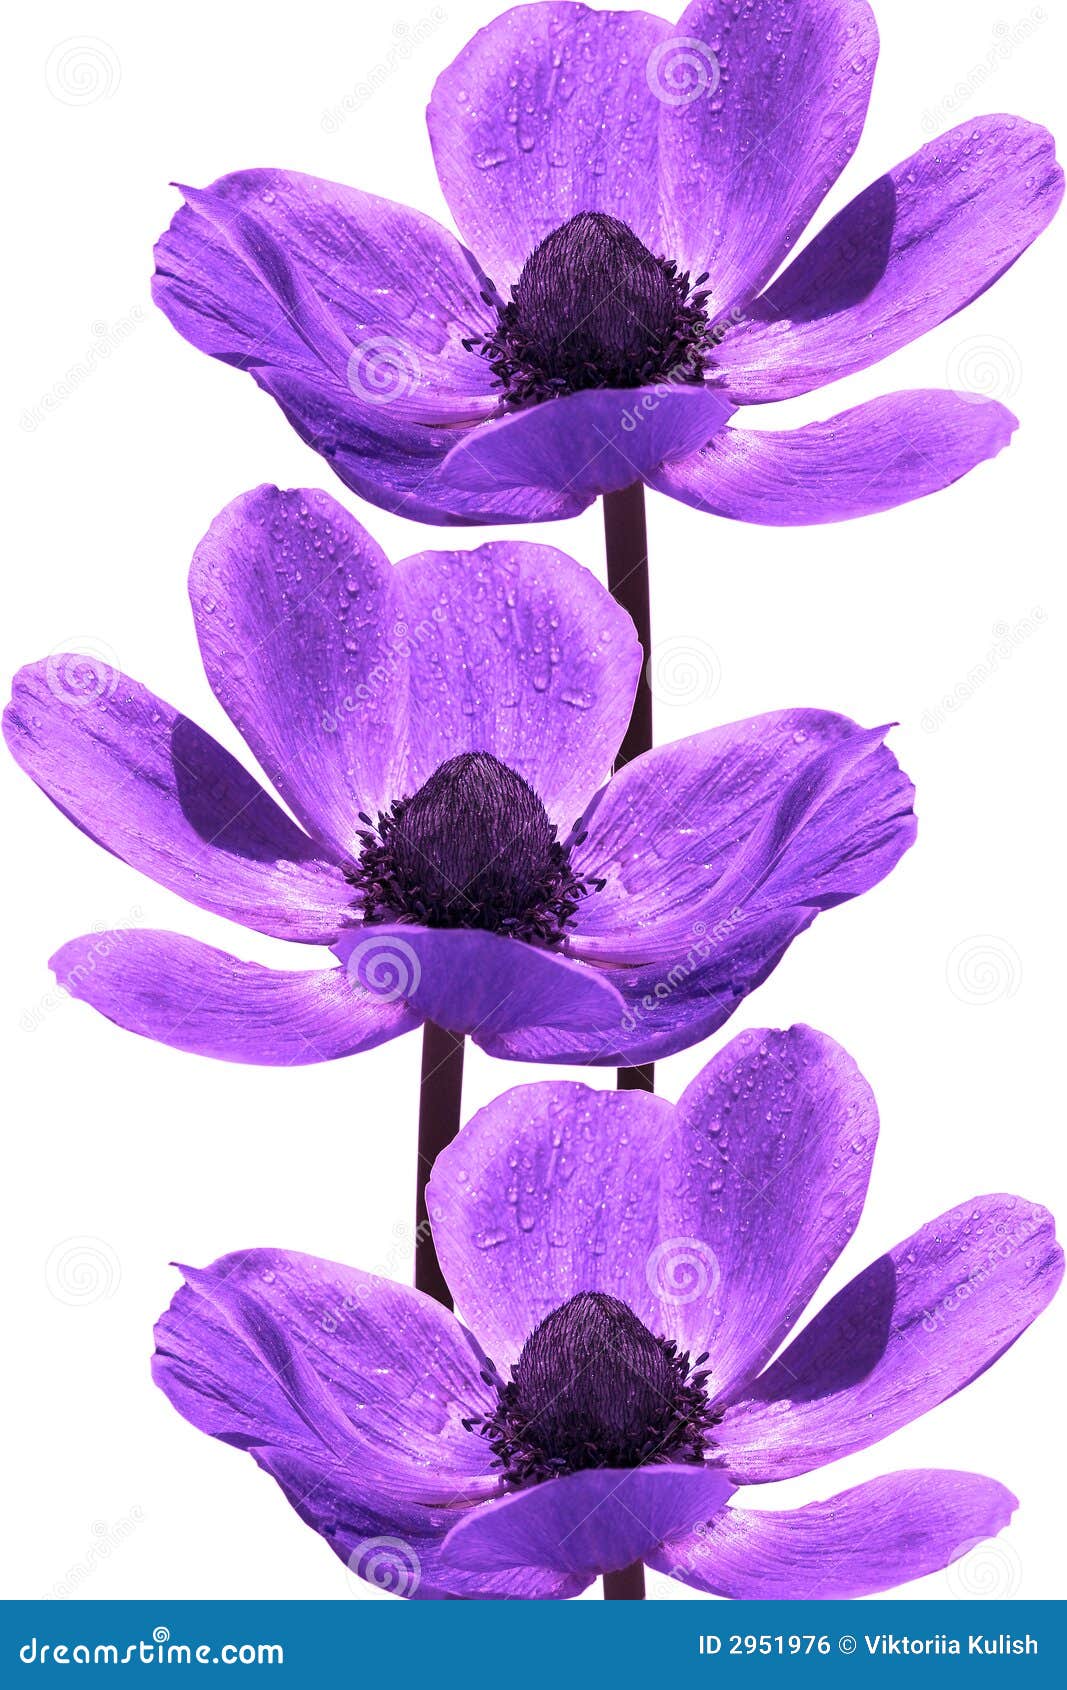 Beautiful Violet Flowers Royalty Free Stock Image - Image: 2951976